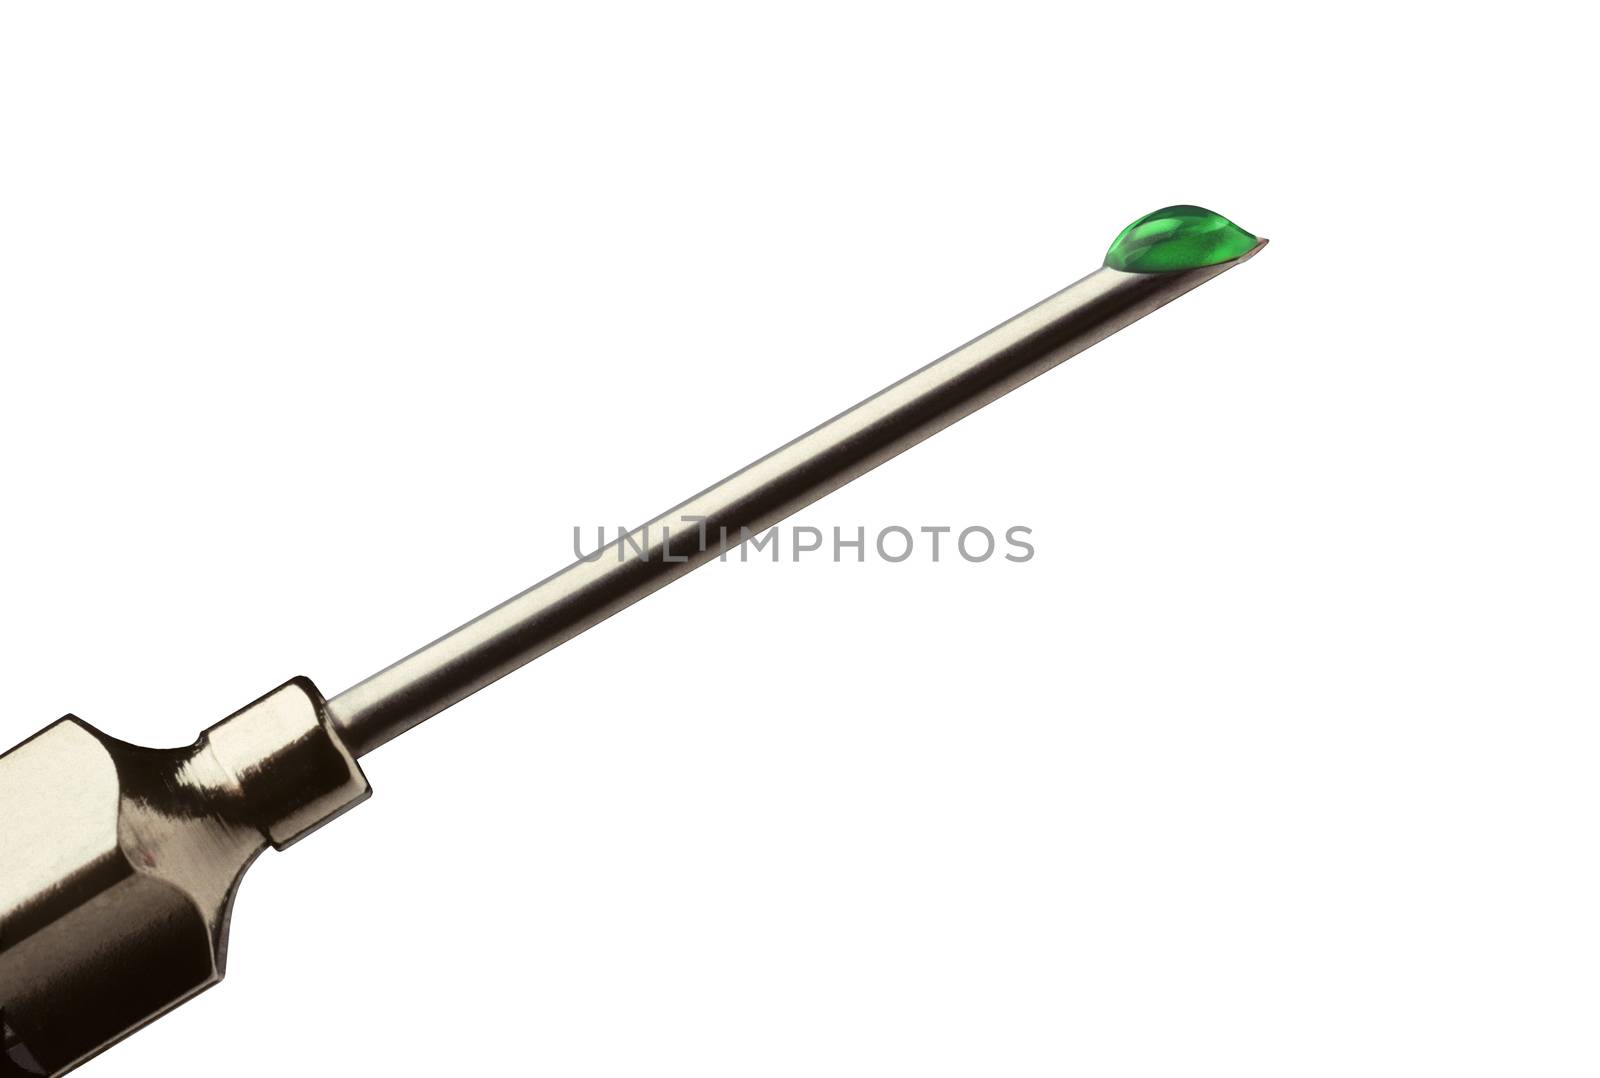 Closeup of a drop of green liquid at the tip of a hypodermic needle against a white background